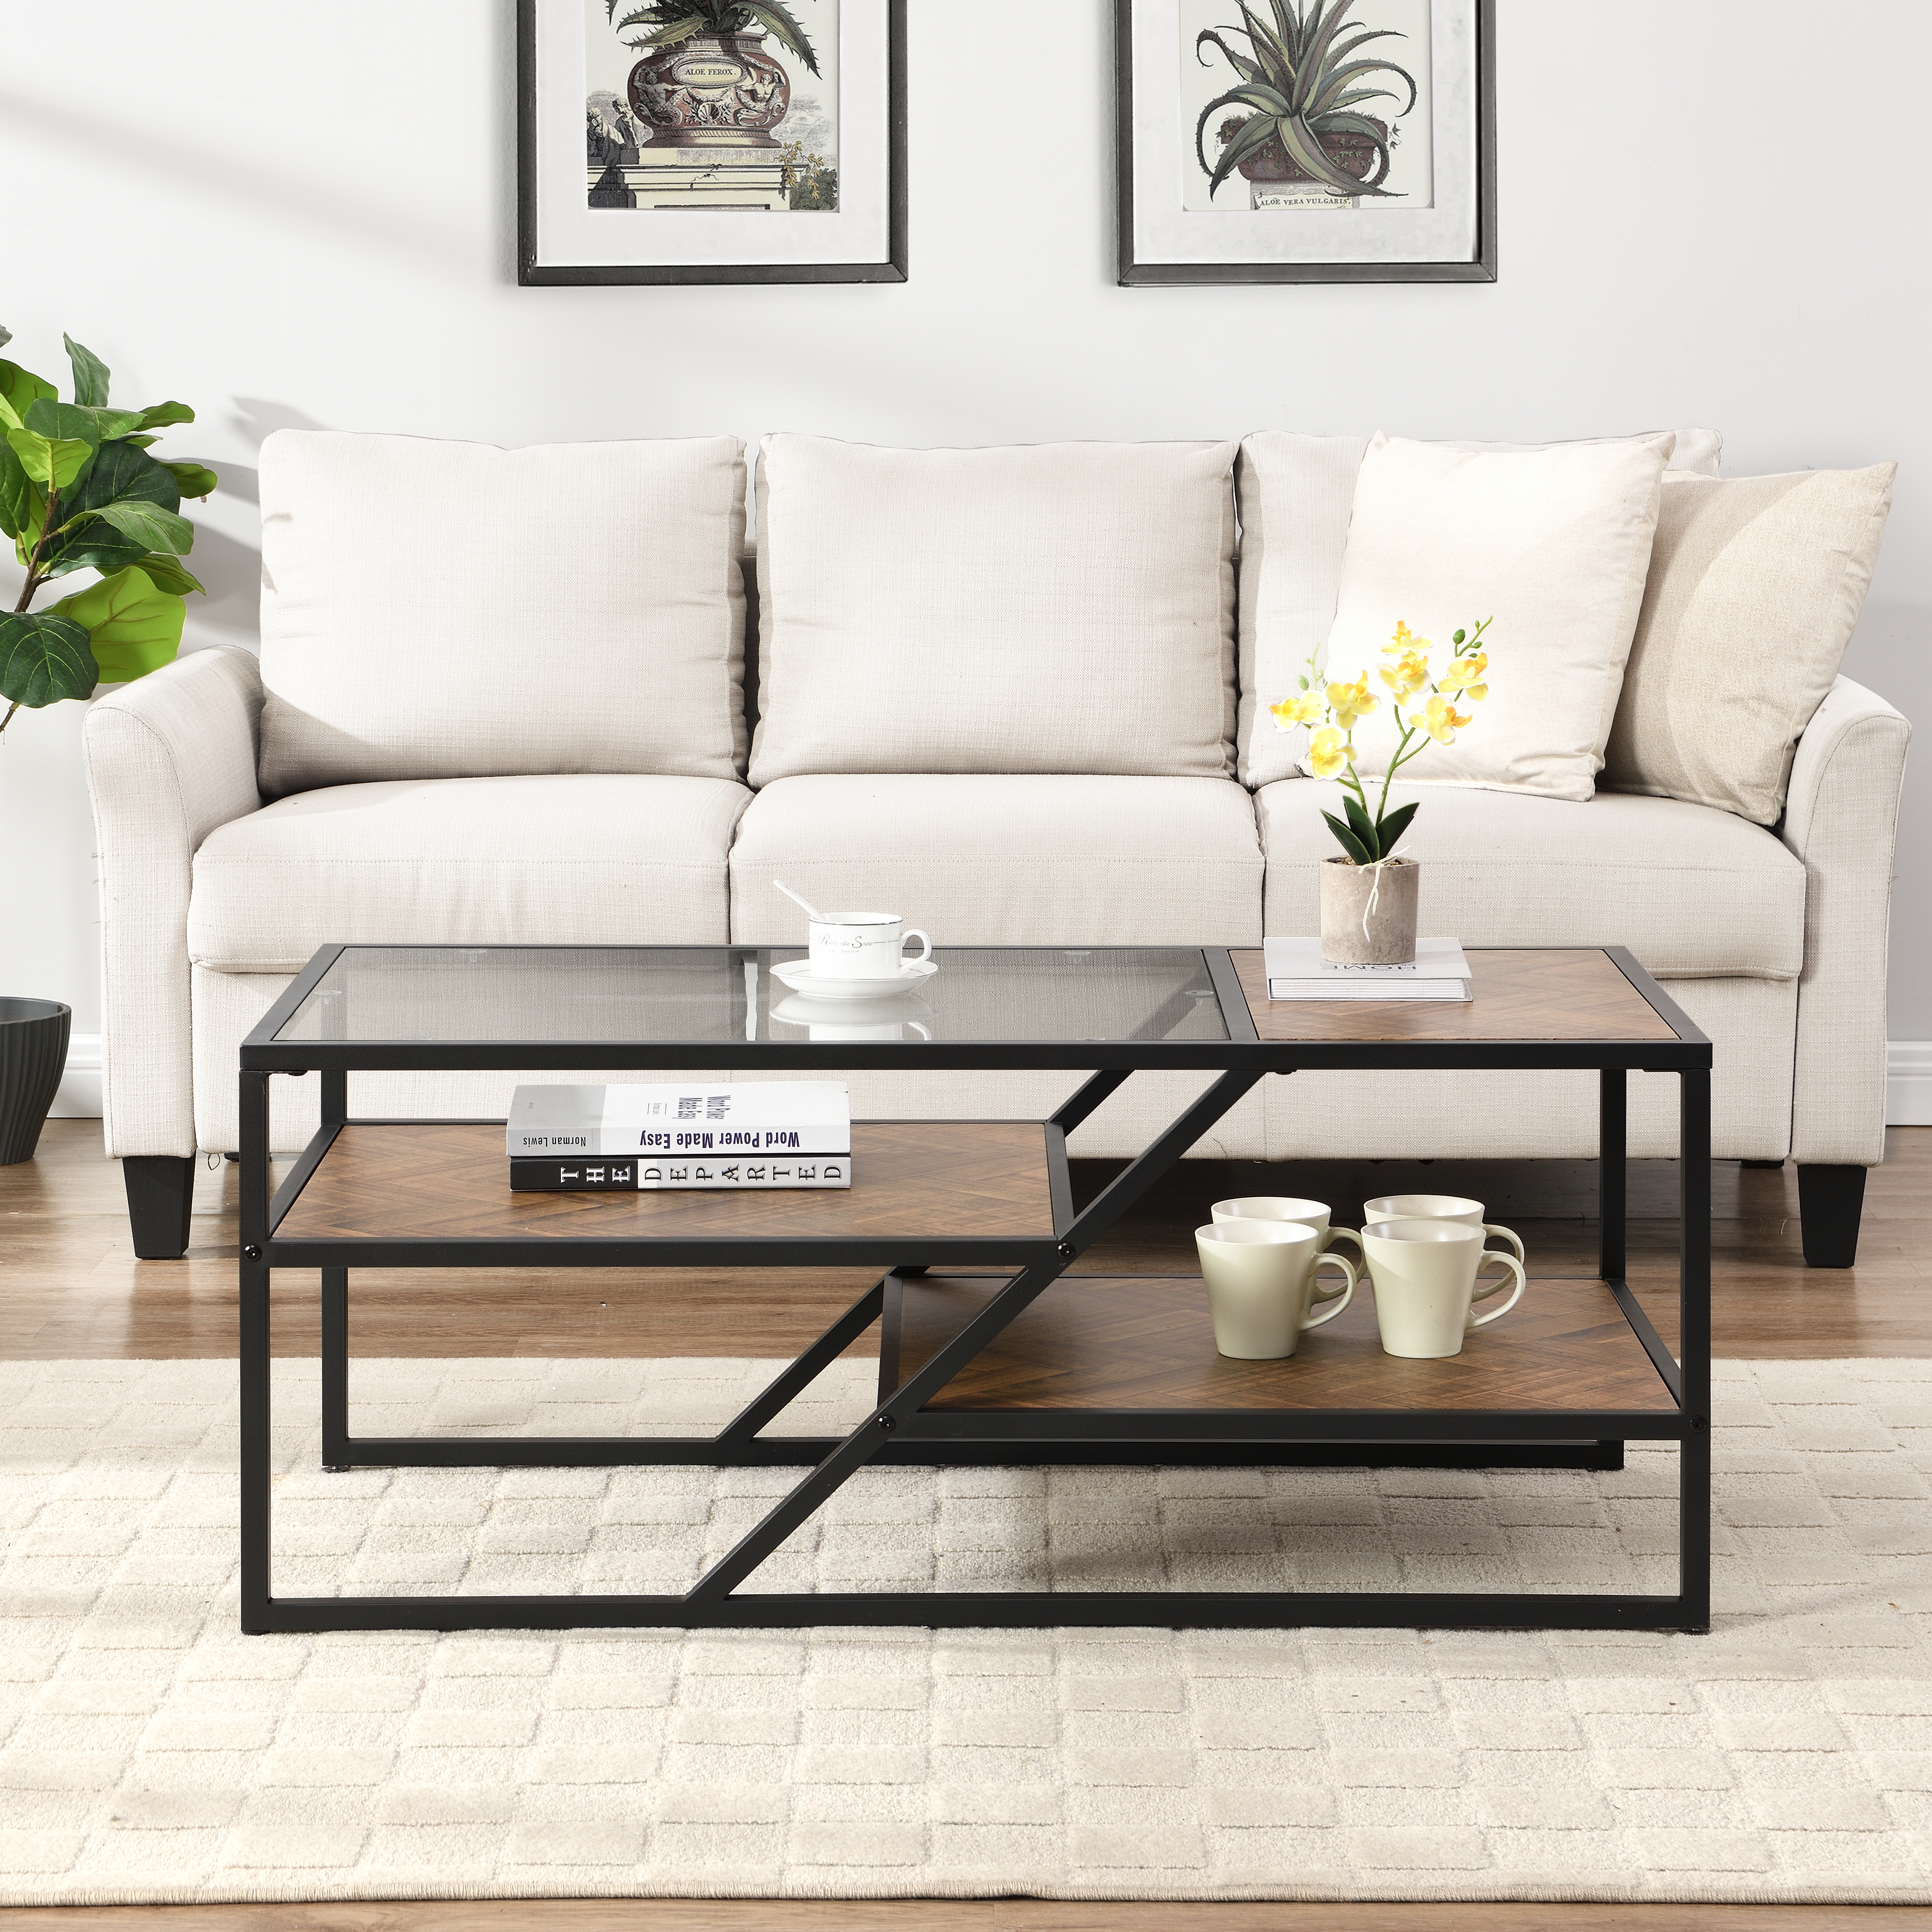 Black Coffee Table with Storage Shelf, Tempered Glass Coffee Table with Metal Frame for Living RoomBedroom